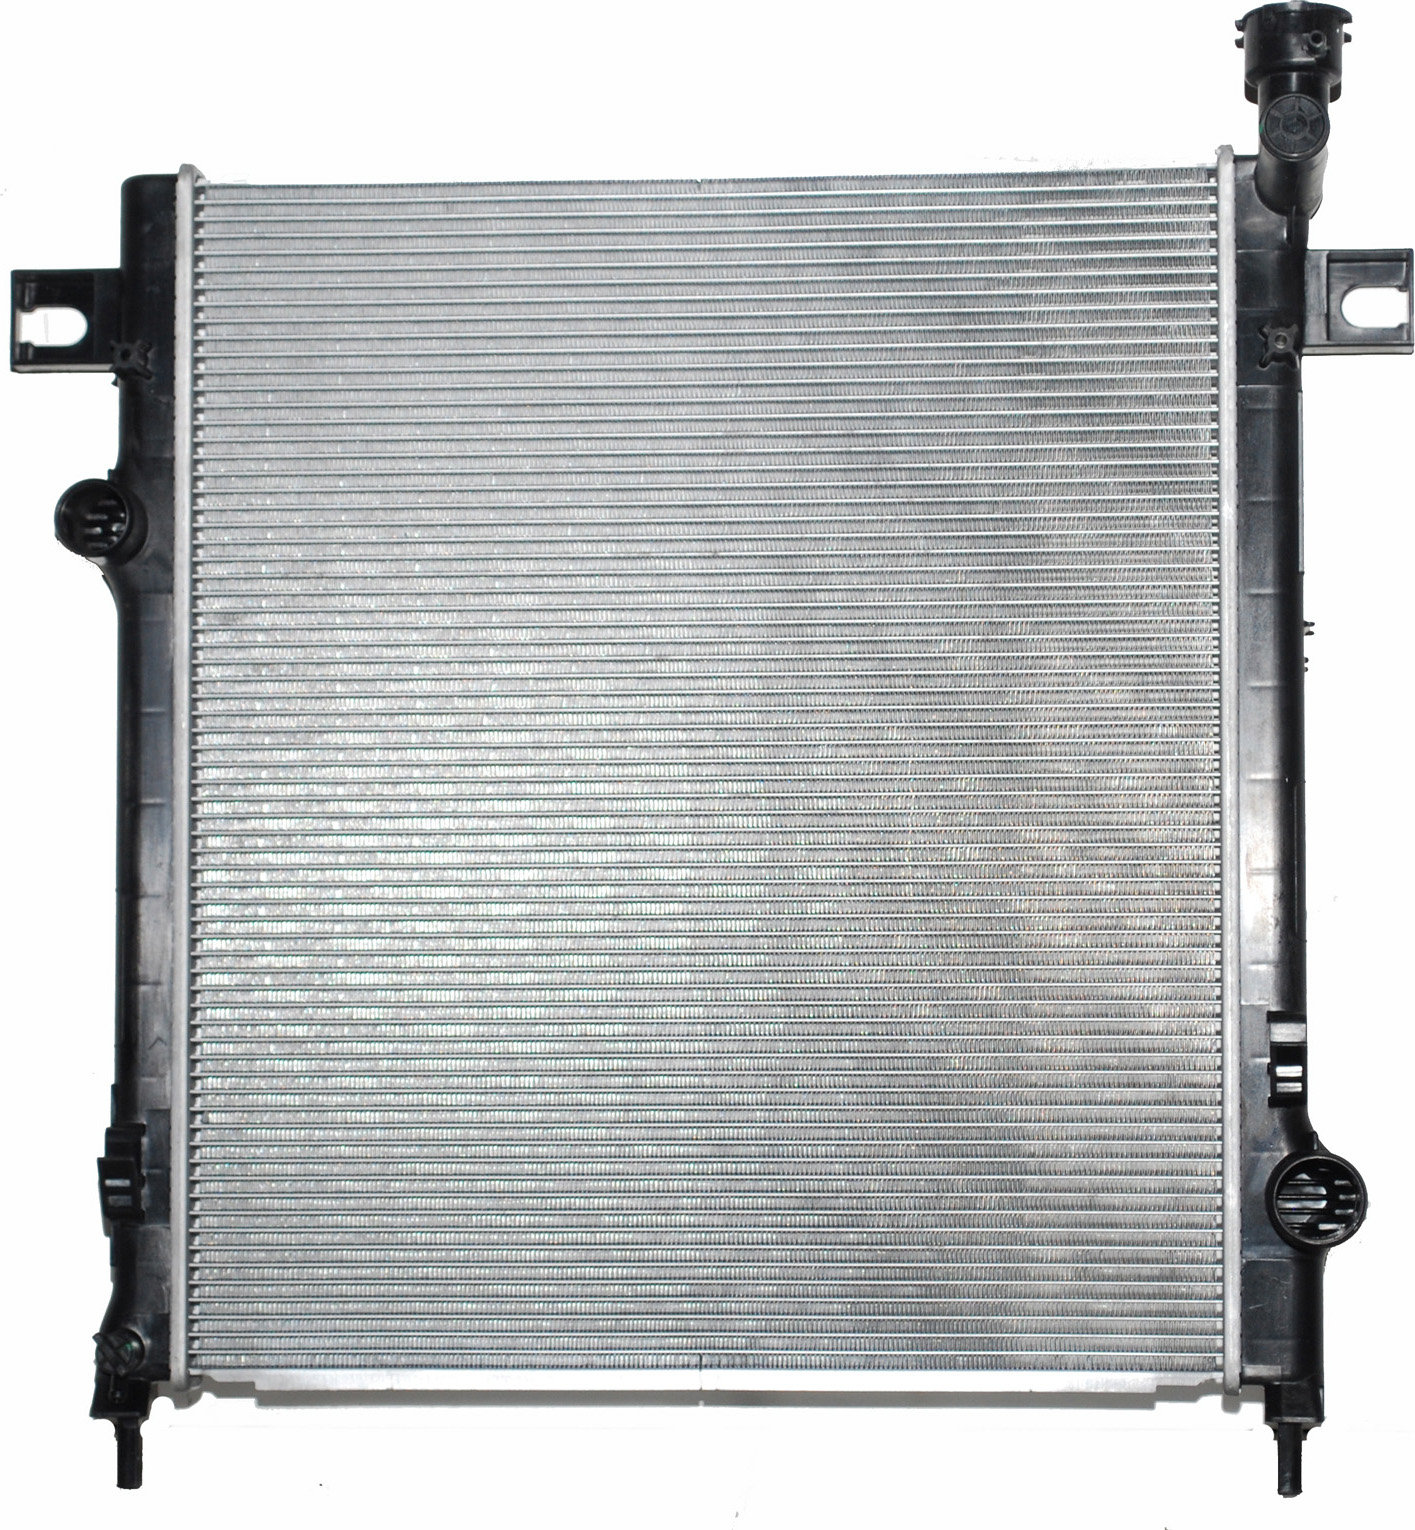 CSF 3425 OE Replacement Radiator with Plastic Tank & Aluminum Core for 08-10  Jeep Liberty KK with 3.7L